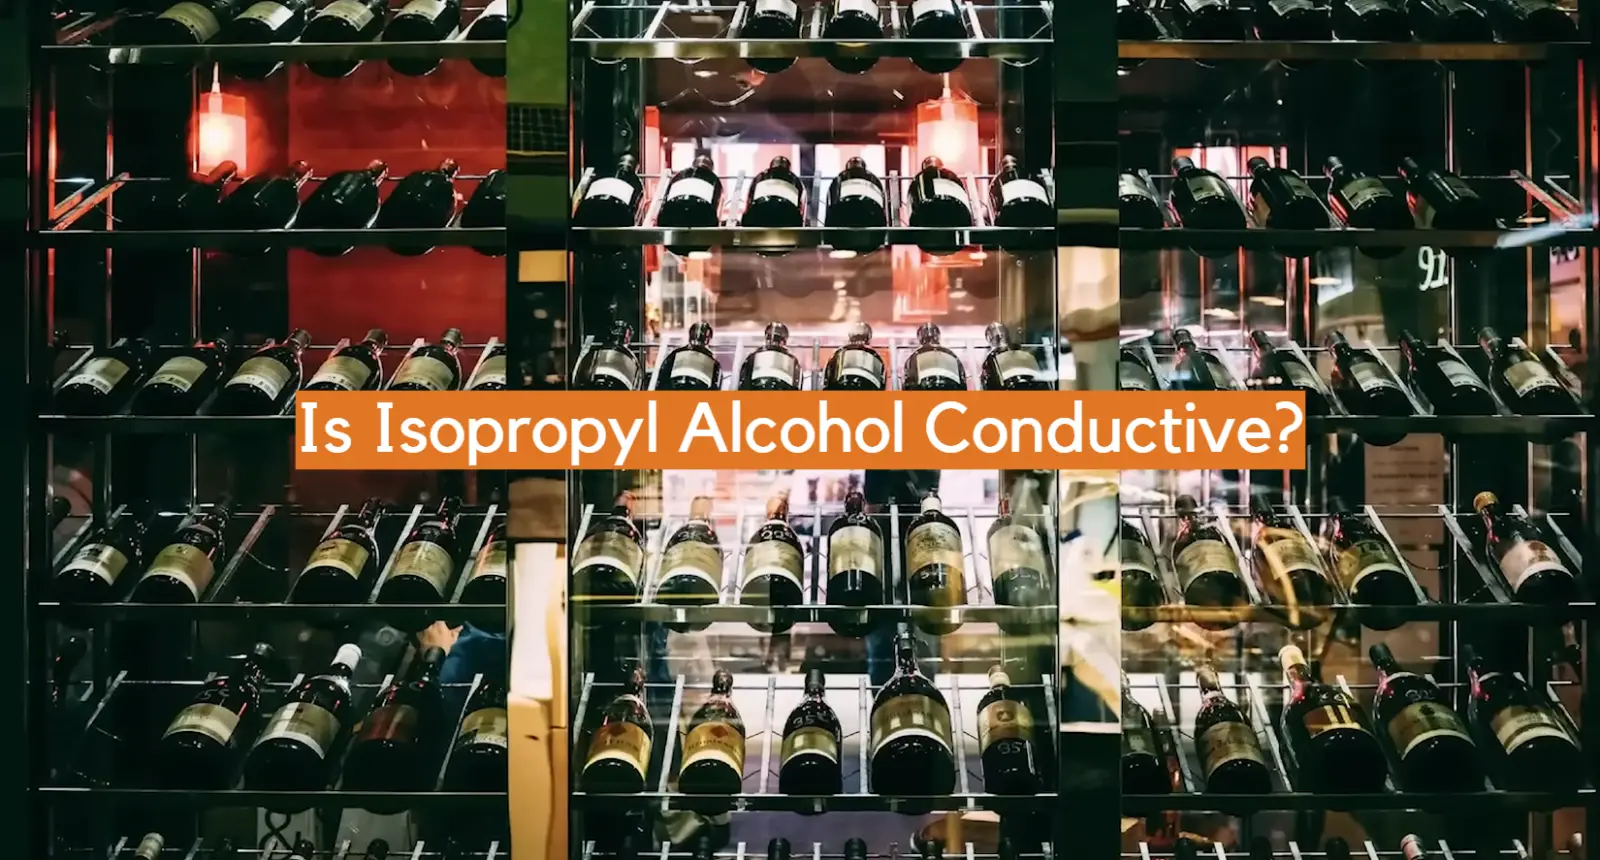 Is Isopropyl Alcohol Conductive?